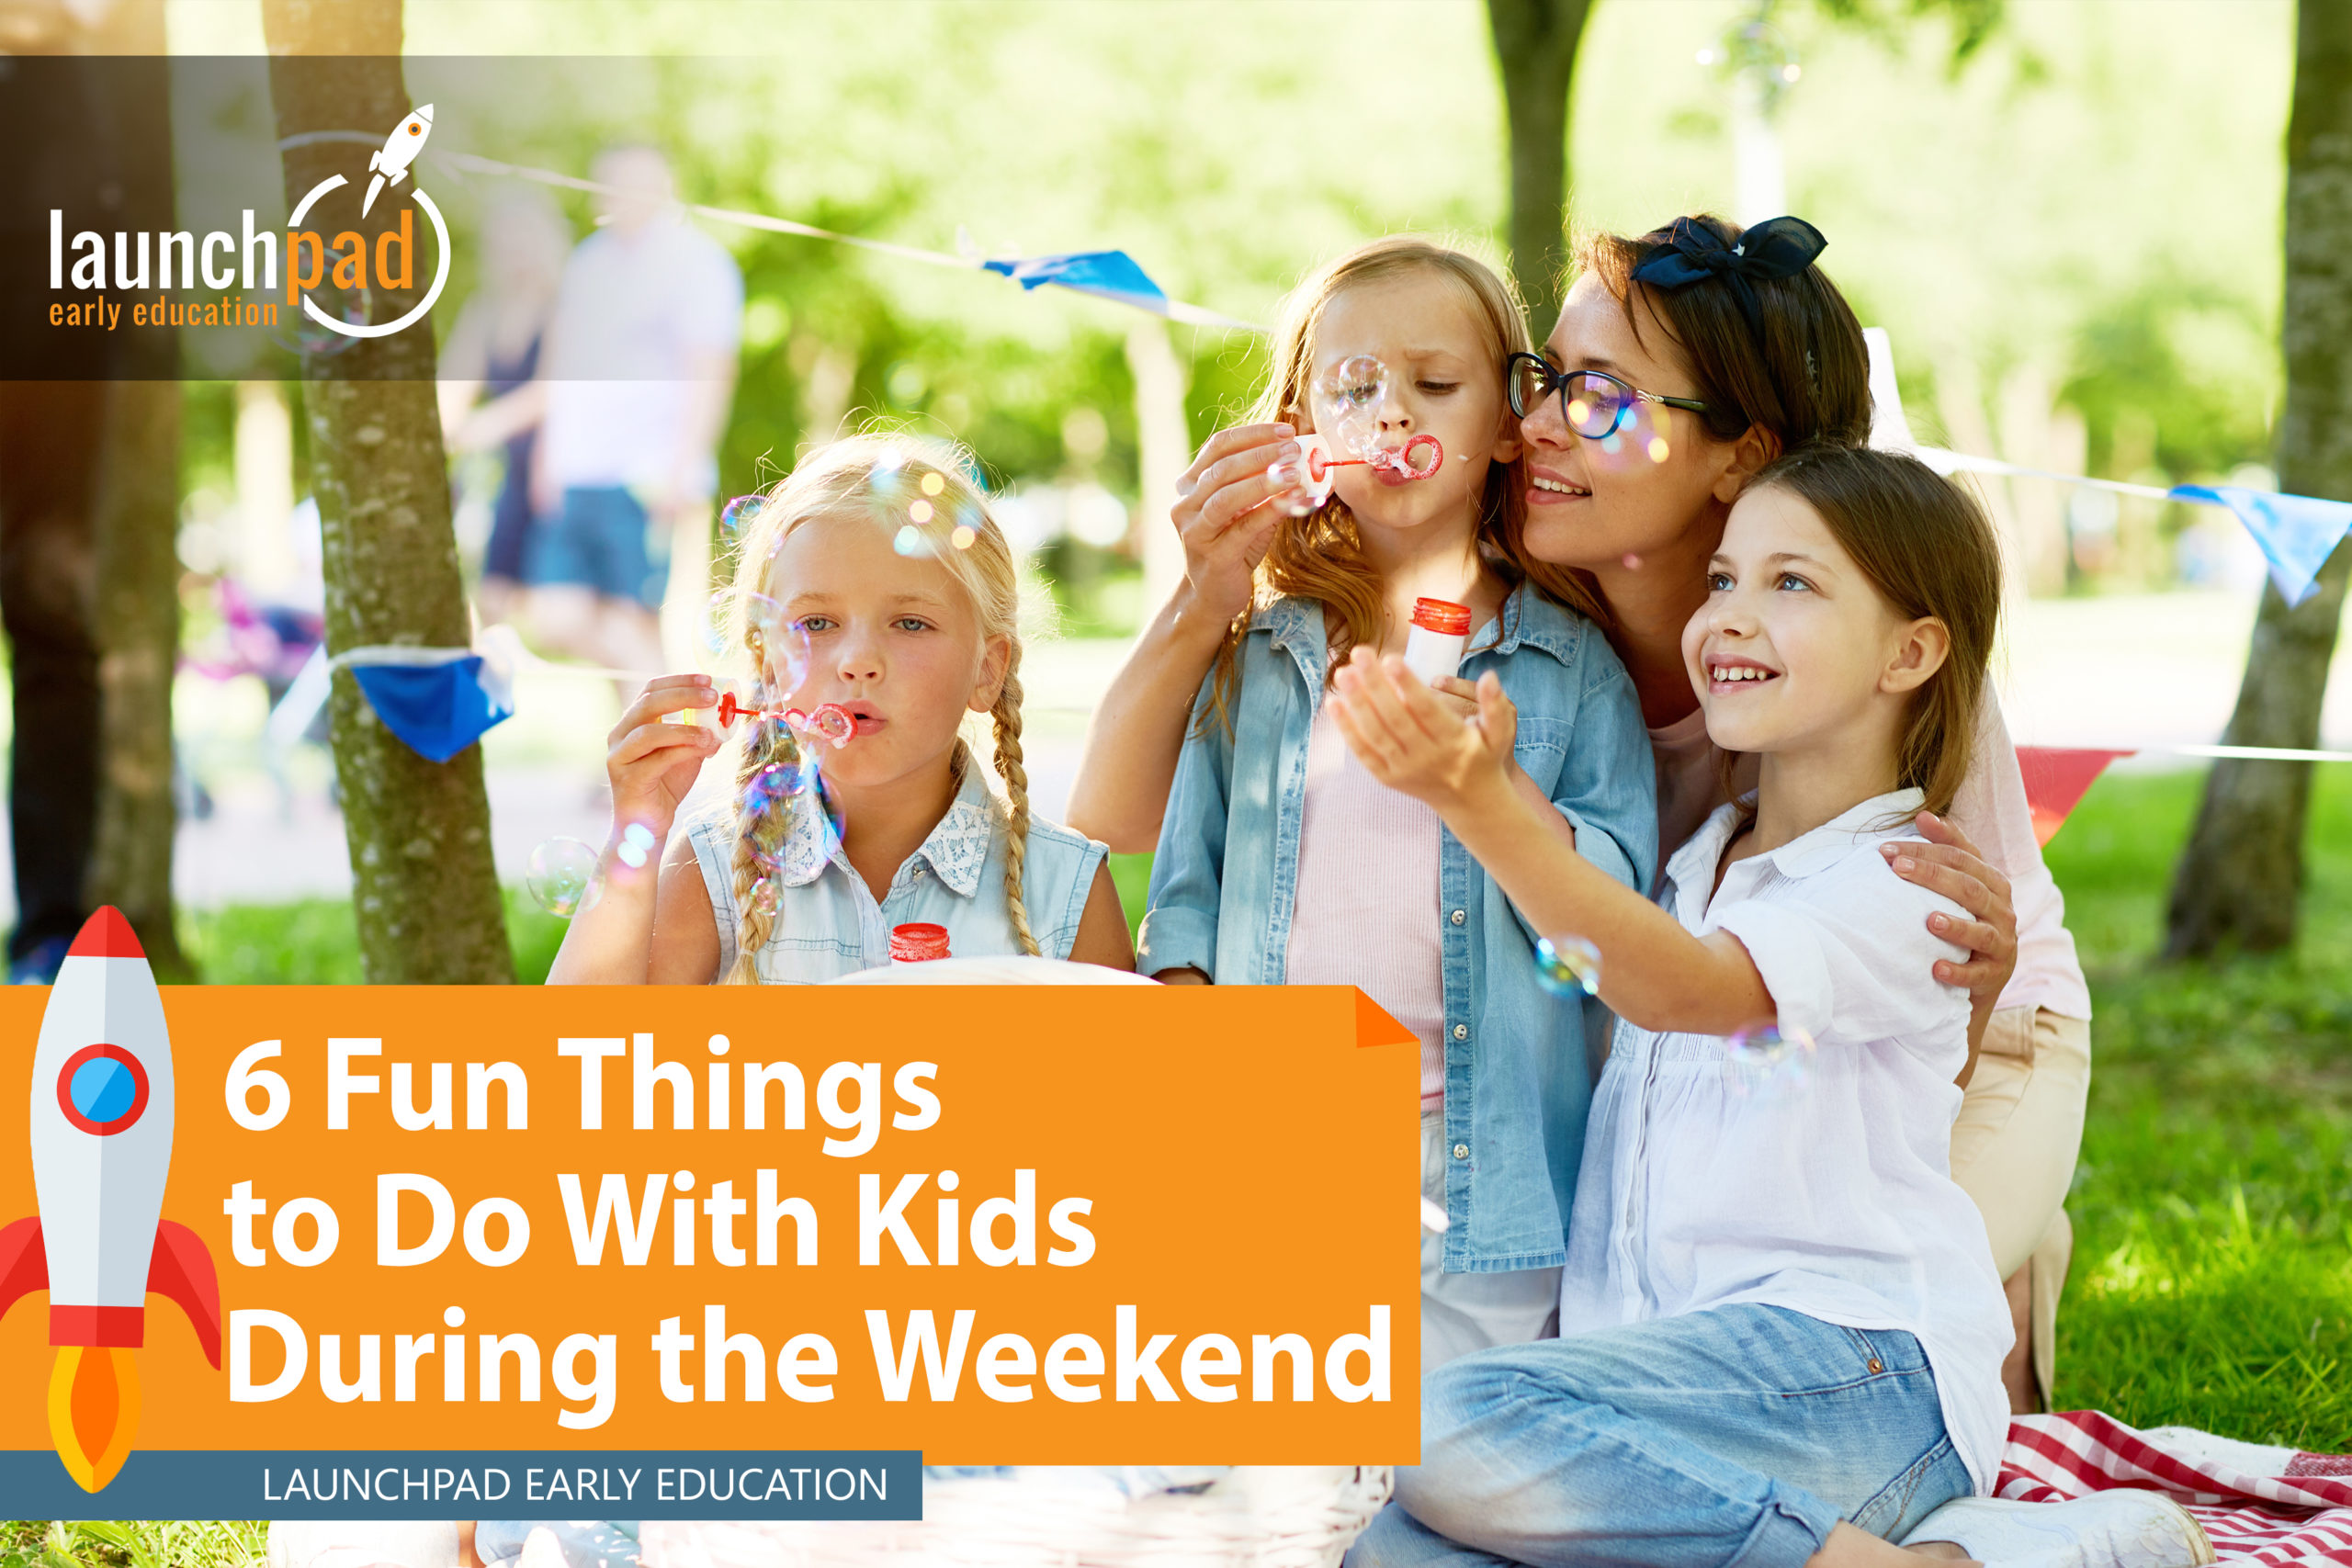 6 fun things to do with kids during the weekend